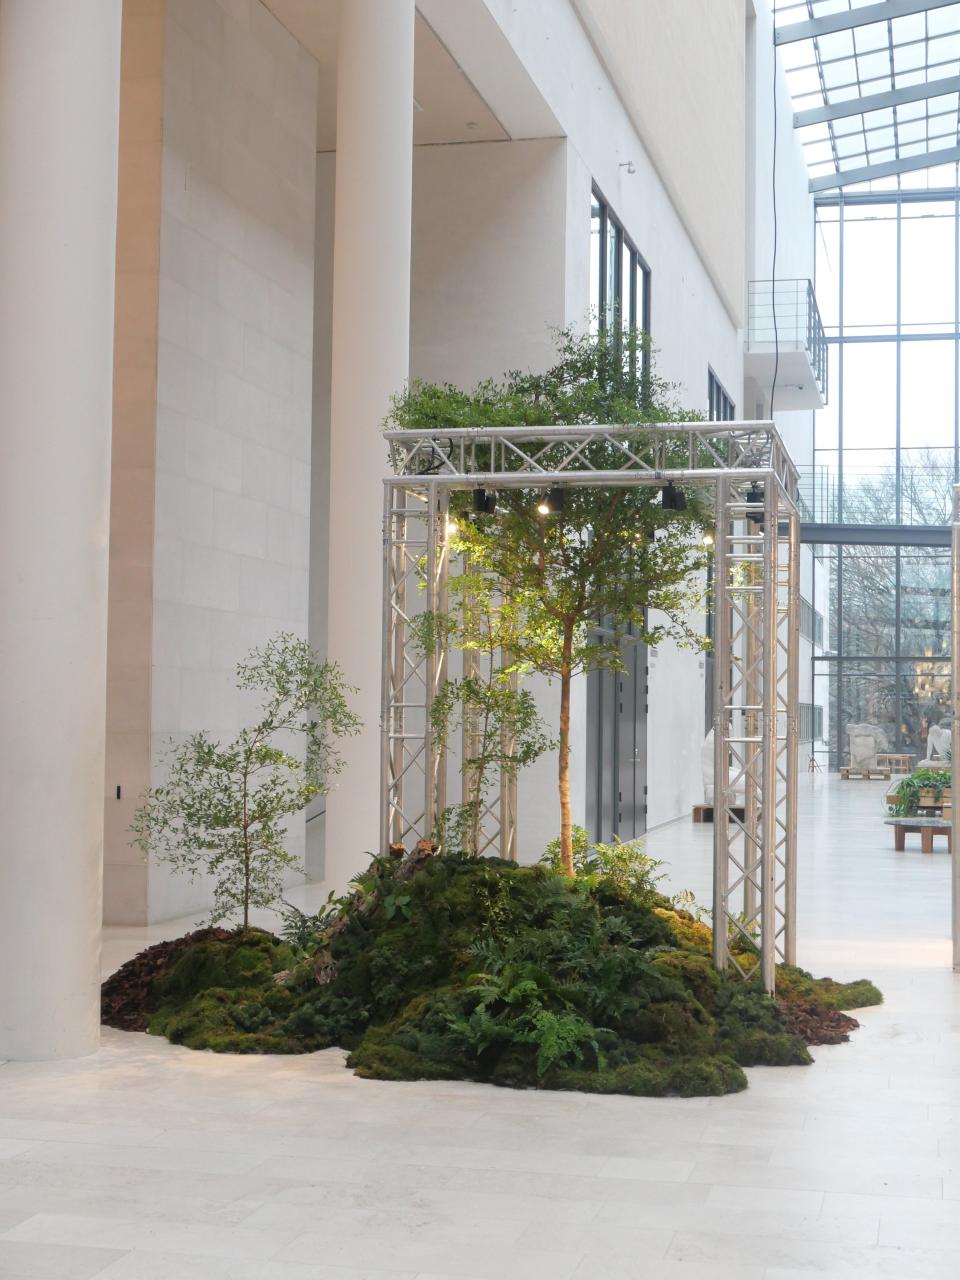 Tableau installation for Zalando. “[We] created a big woody installation for Zalando at Statens Musuem for Kunst in Copenhagen inspired by the urban life style and bringing nature in to our digital world. For the installation a real bucida tree, moss, wood, and ferns was used. It was created upon an underneath structure to give support to the moss, ferns, wood, and roots from the tree.”